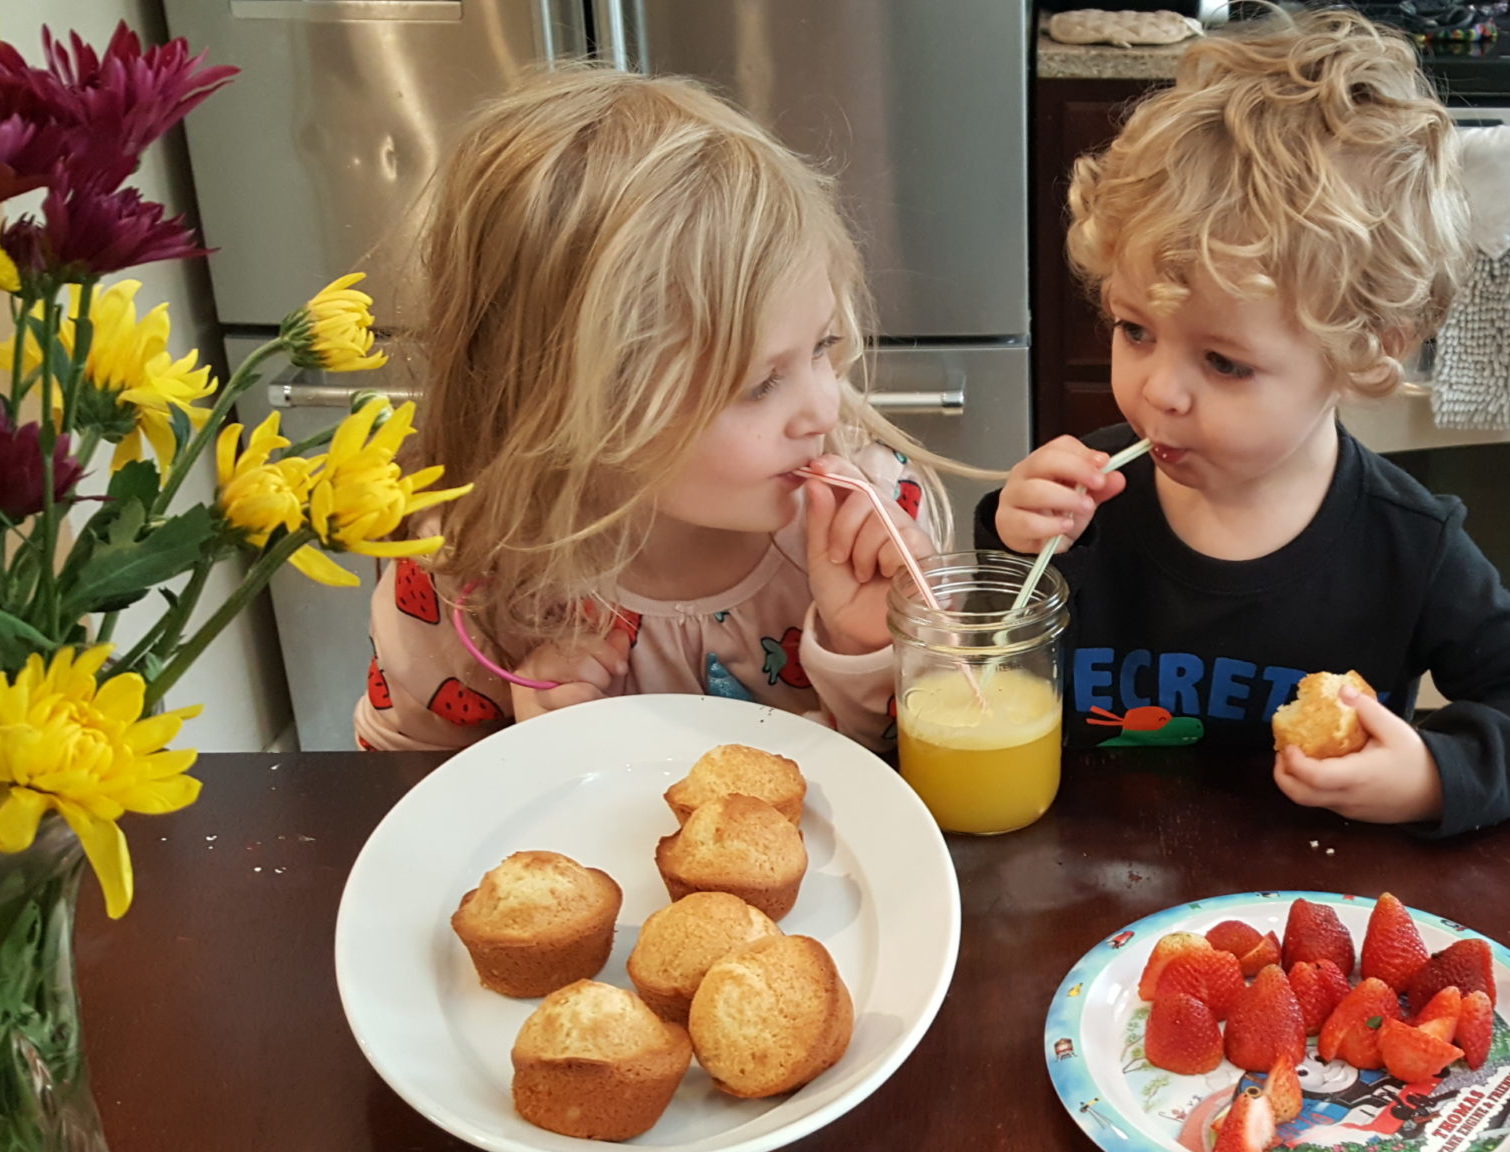 a blonde girl sharing orange juice with two straws with her blonde brother while eating muffins and strawberries